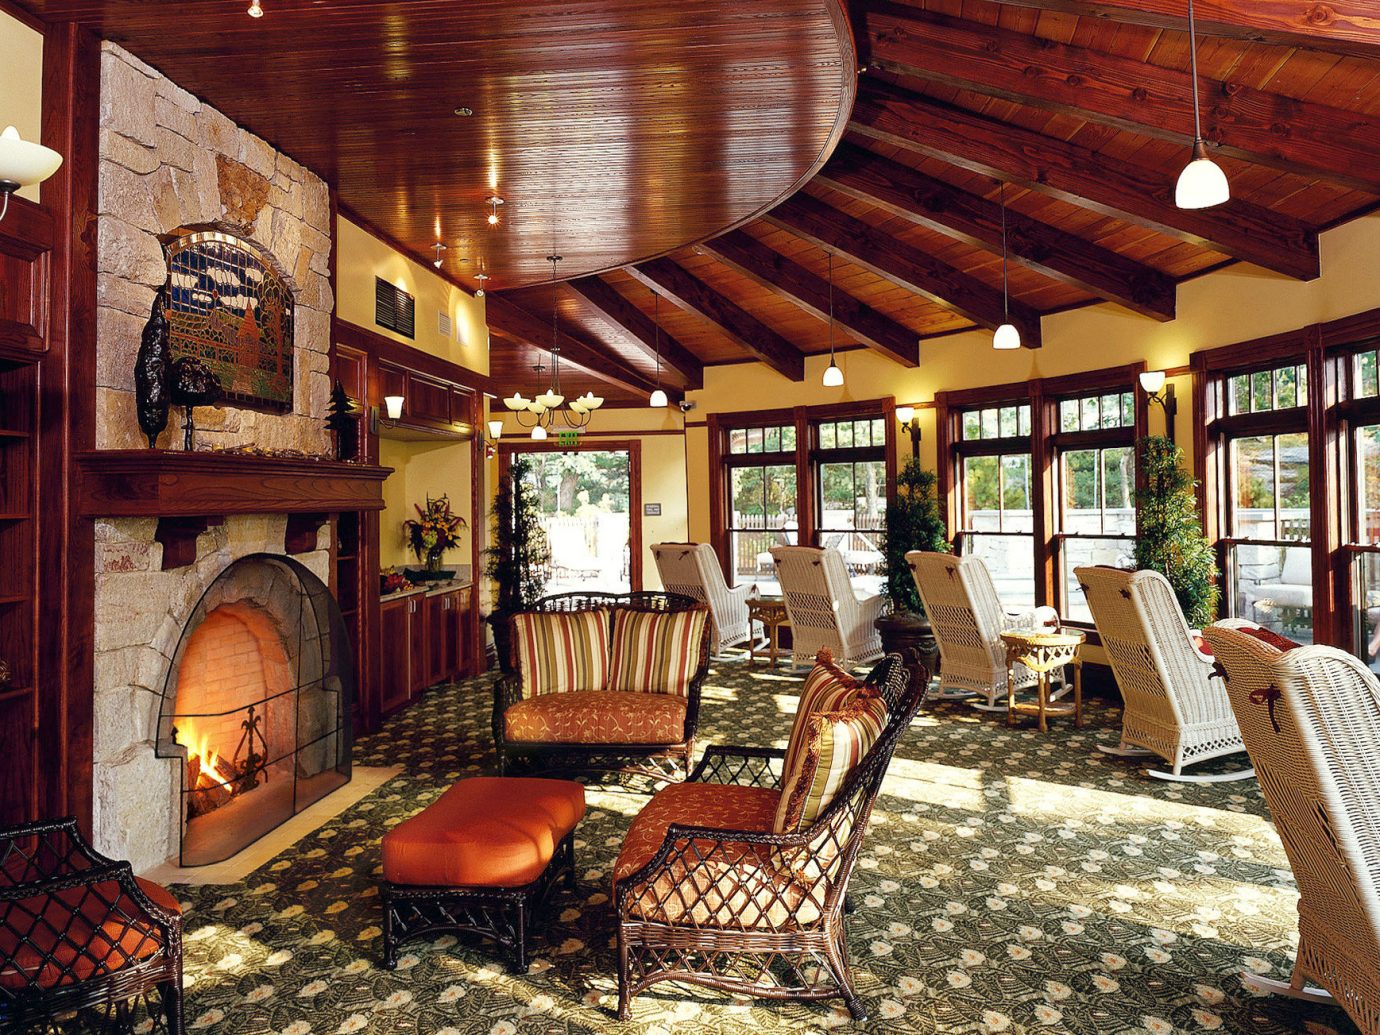 Classic Fireplace Hotels Lakes + Rivers Lounge Luxury Mountains New York Outdoor Activities Resort Romance Romantic Hotels indoor property room ceiling Living estate living room home furniture interior design log cabin cottage mansion Lobby area several